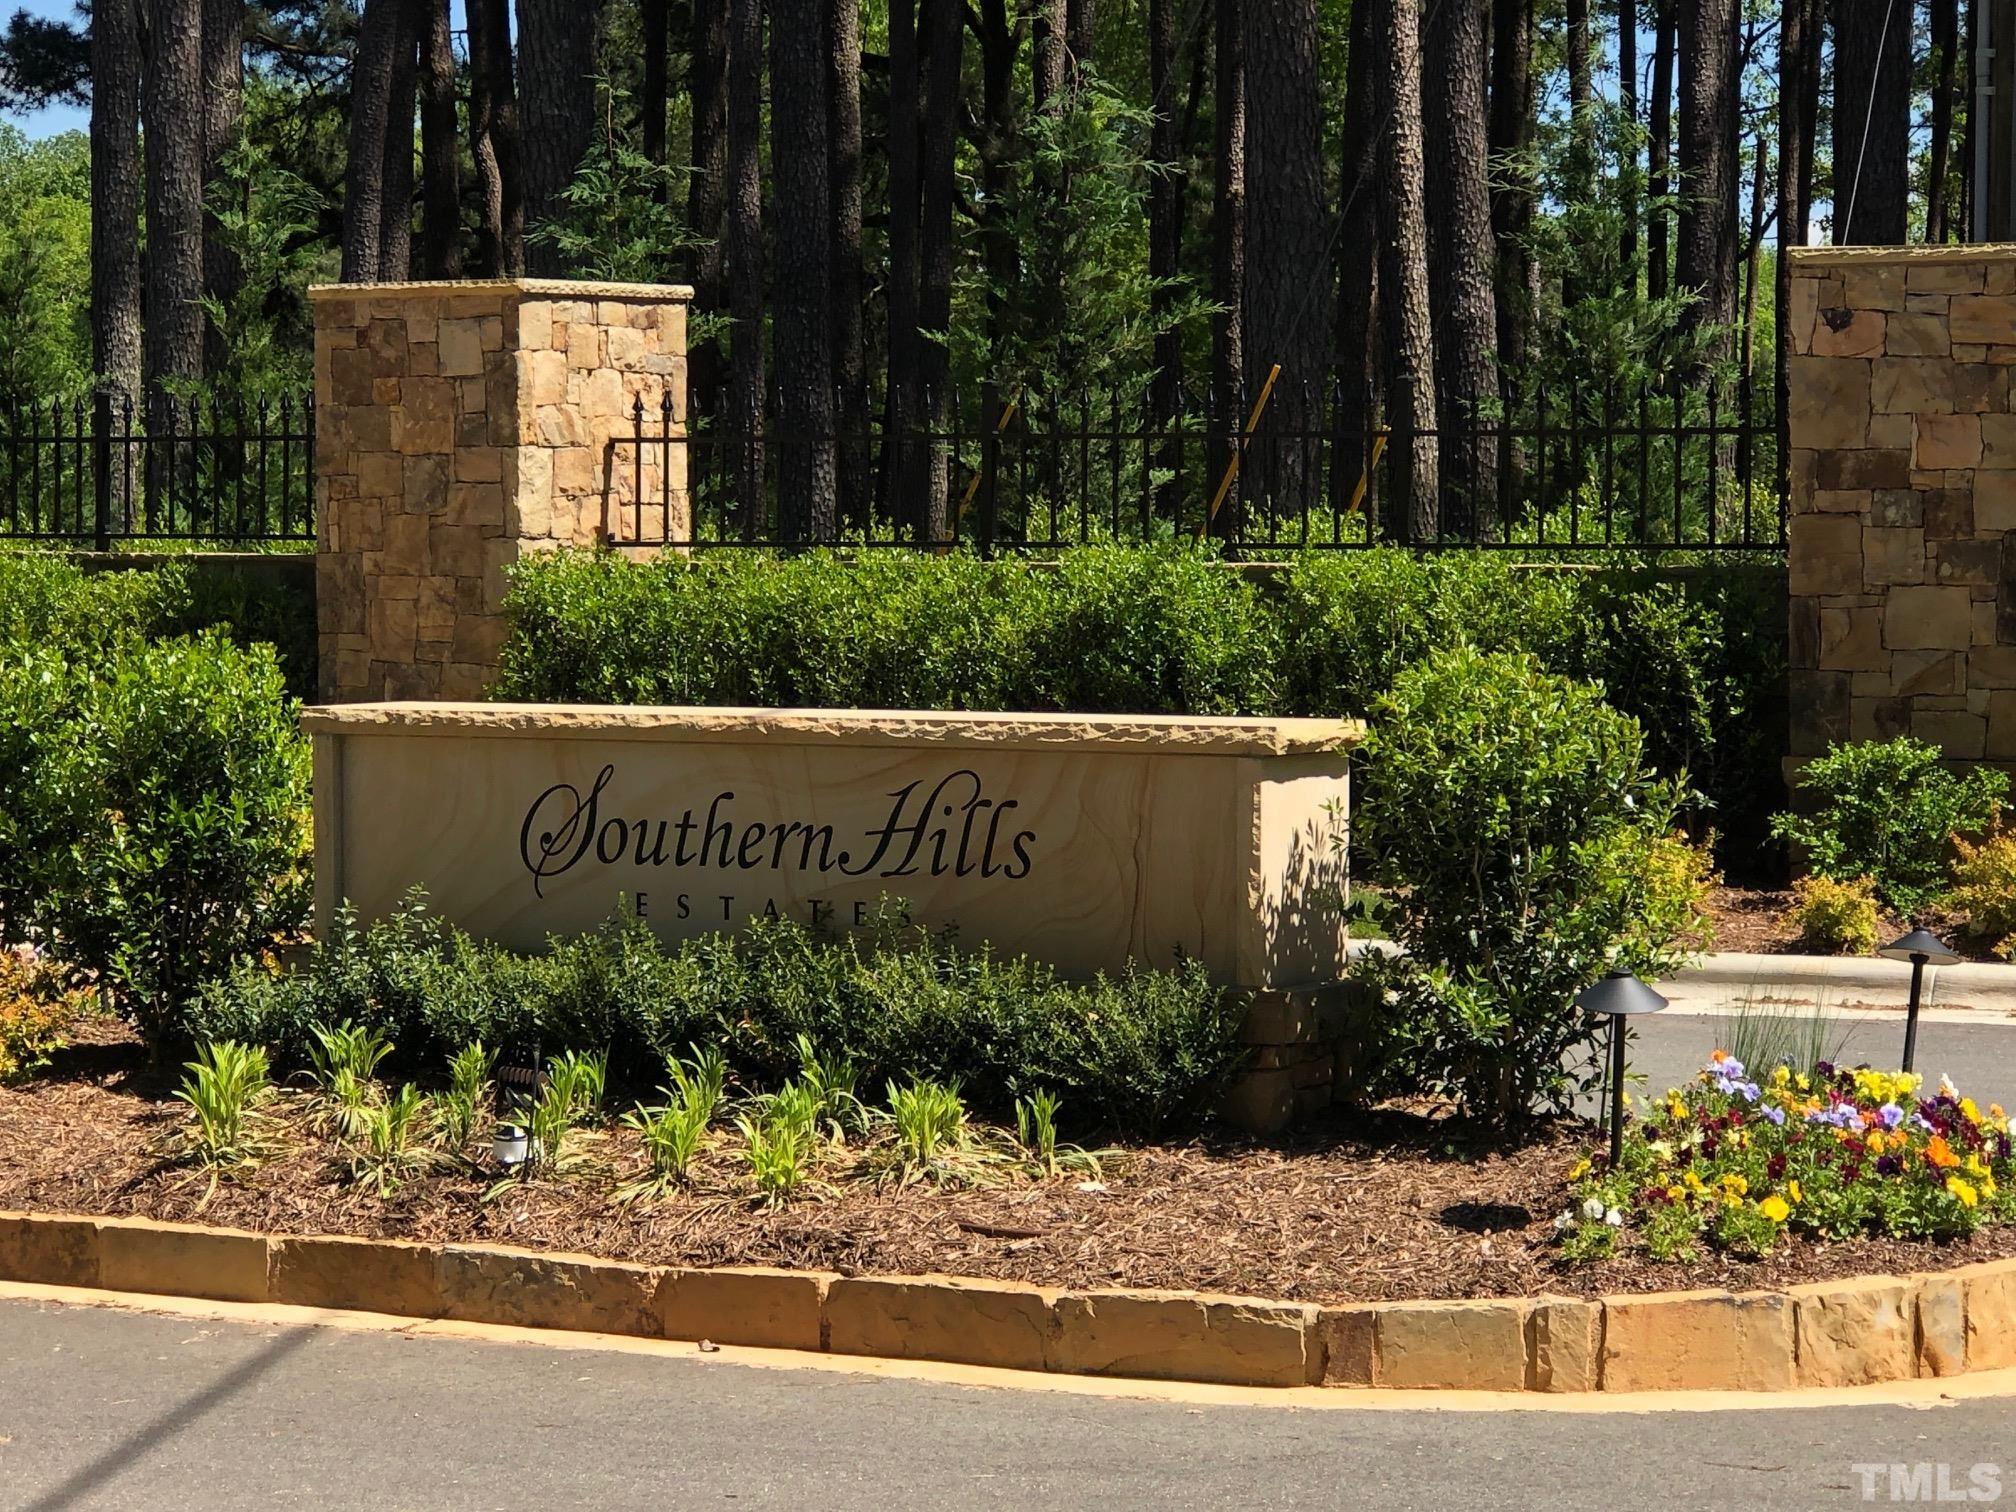 Grand Gated Entrance into Southern Hills Estates